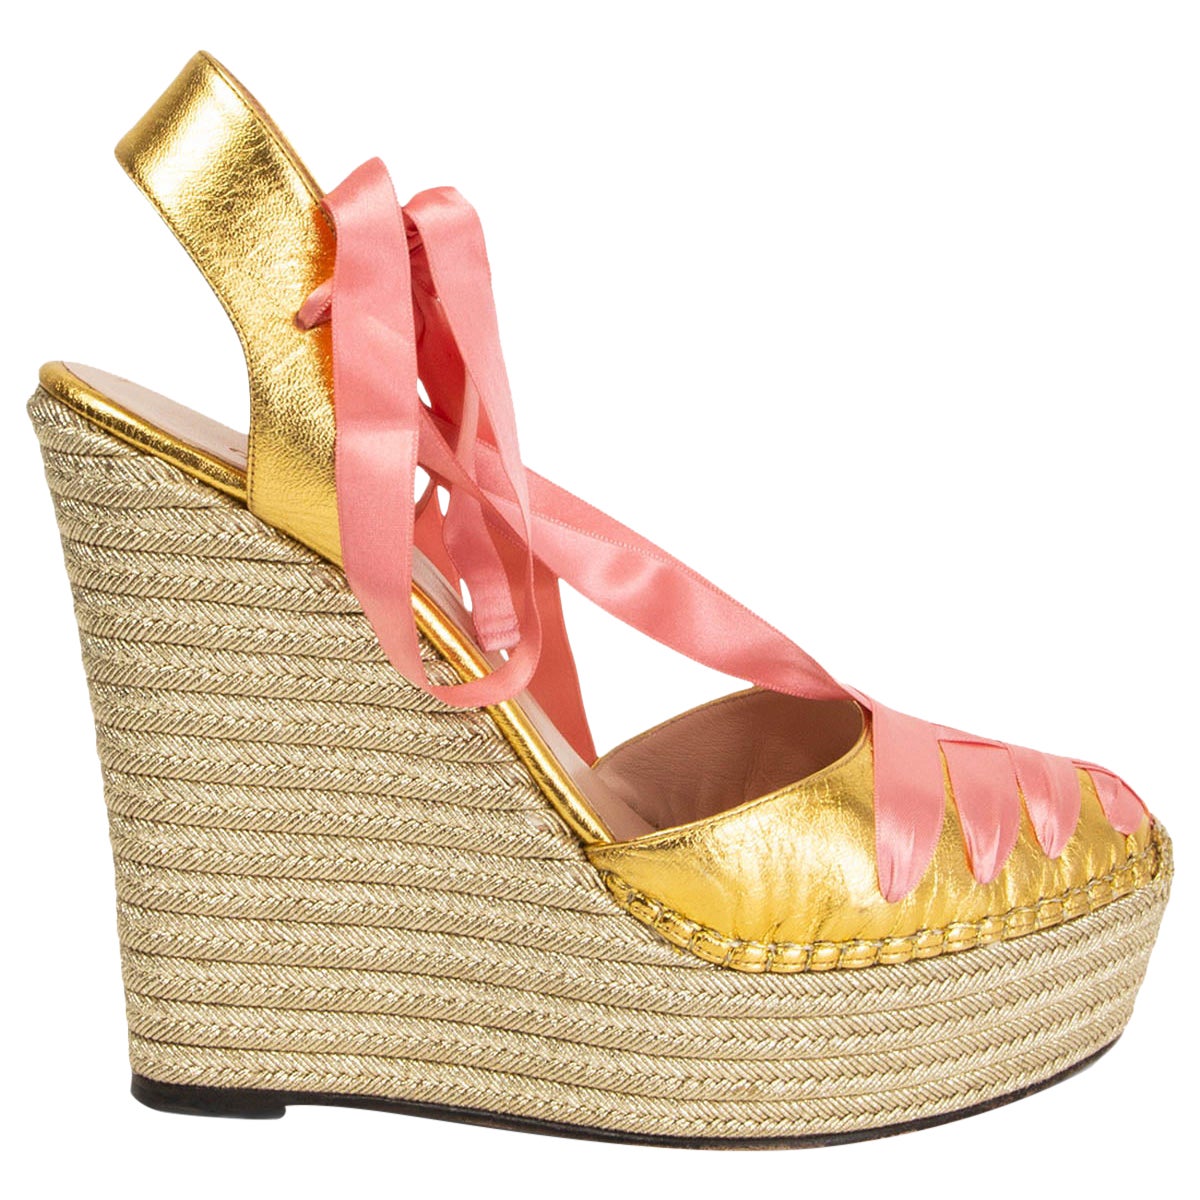 GUCCI metallic gold leather pink satin ALEXIS Platform Wedge Sandals Shoes 41.5 For Sale